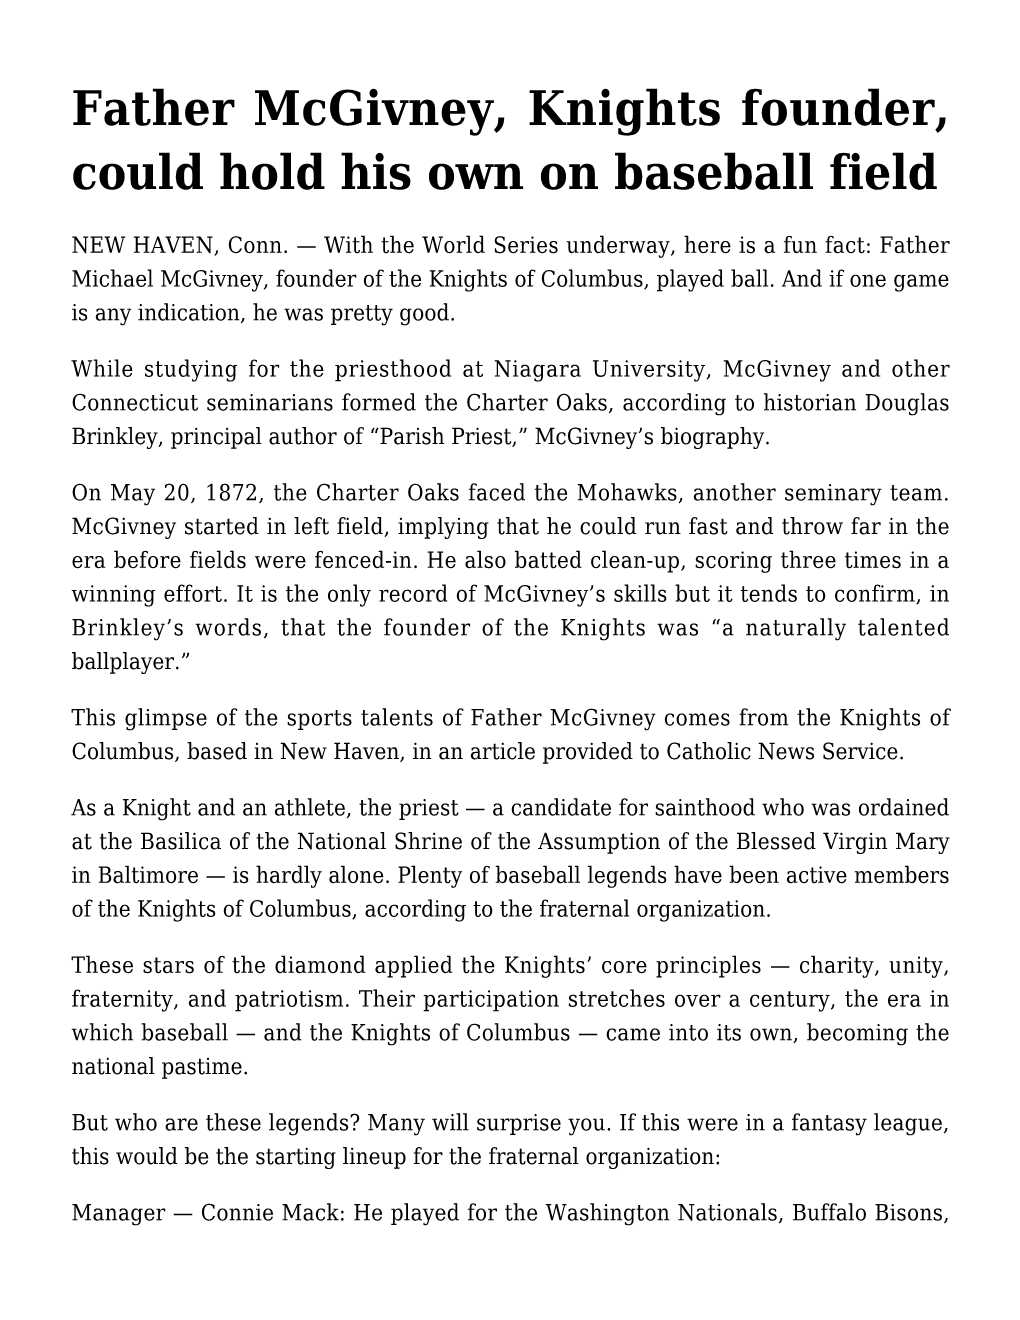 Father Mcgivney, Knights Founder, Could Hold His Own on Baseball Field